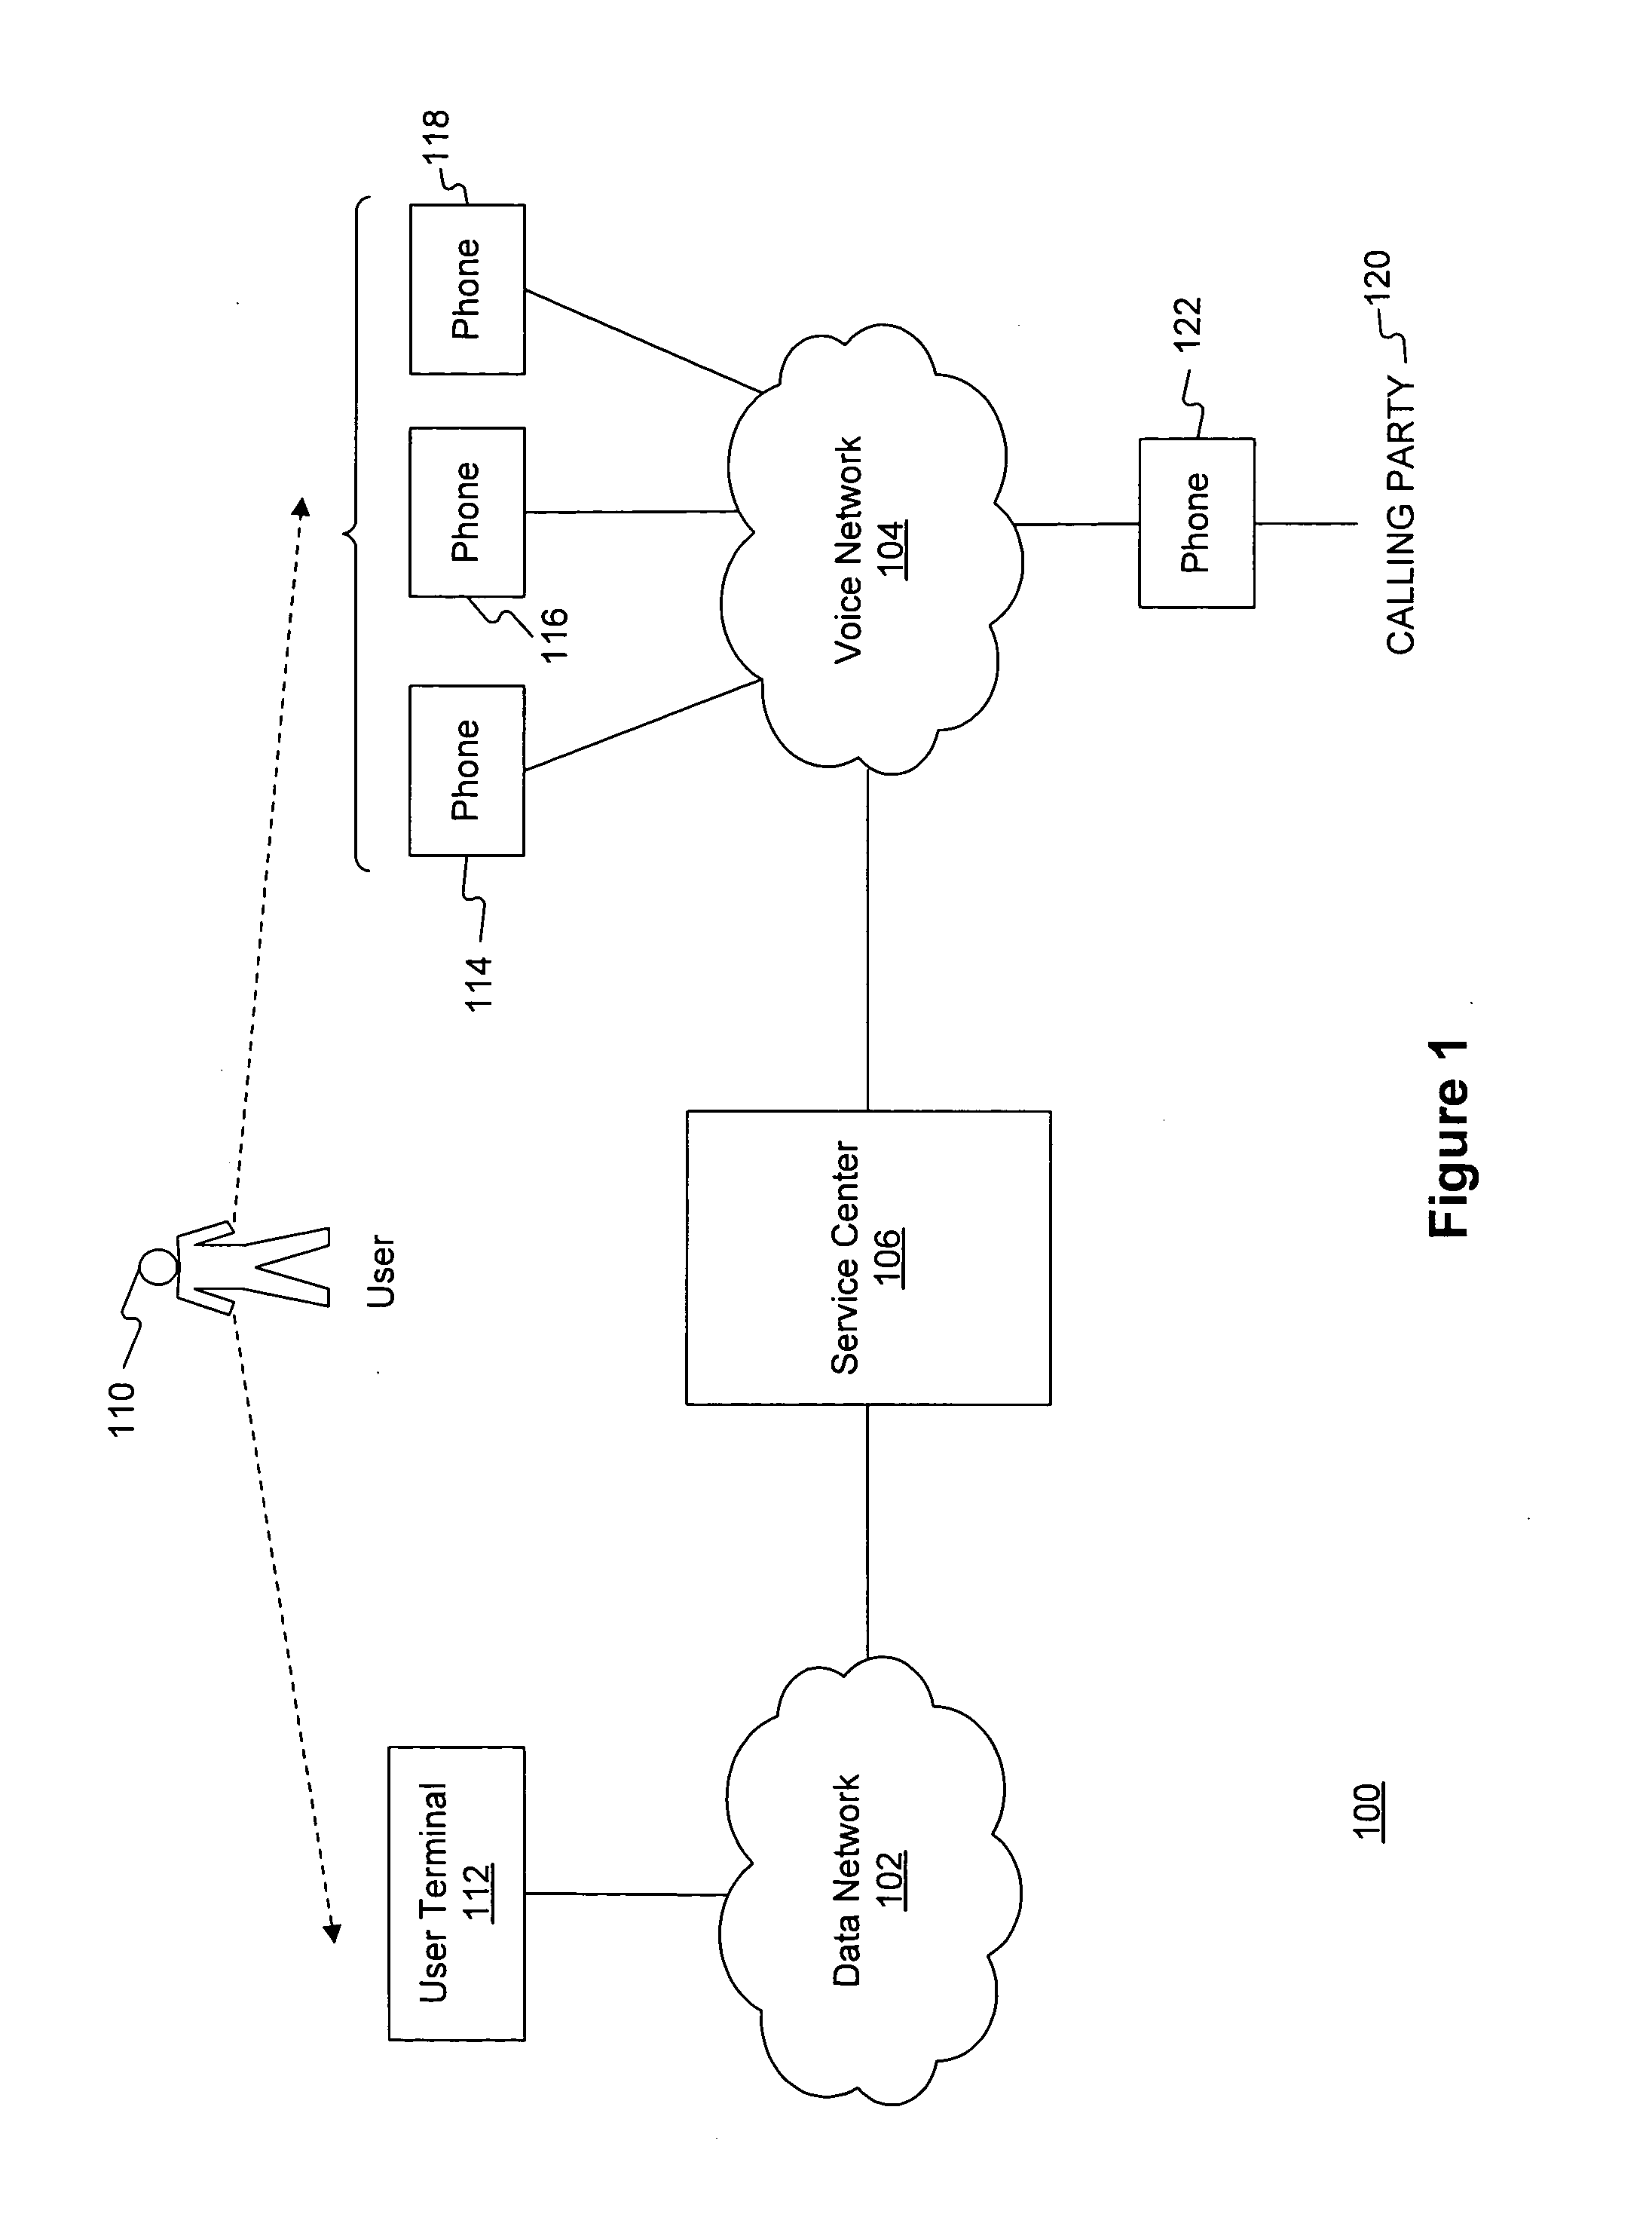 Methods and systems for integrating communications services